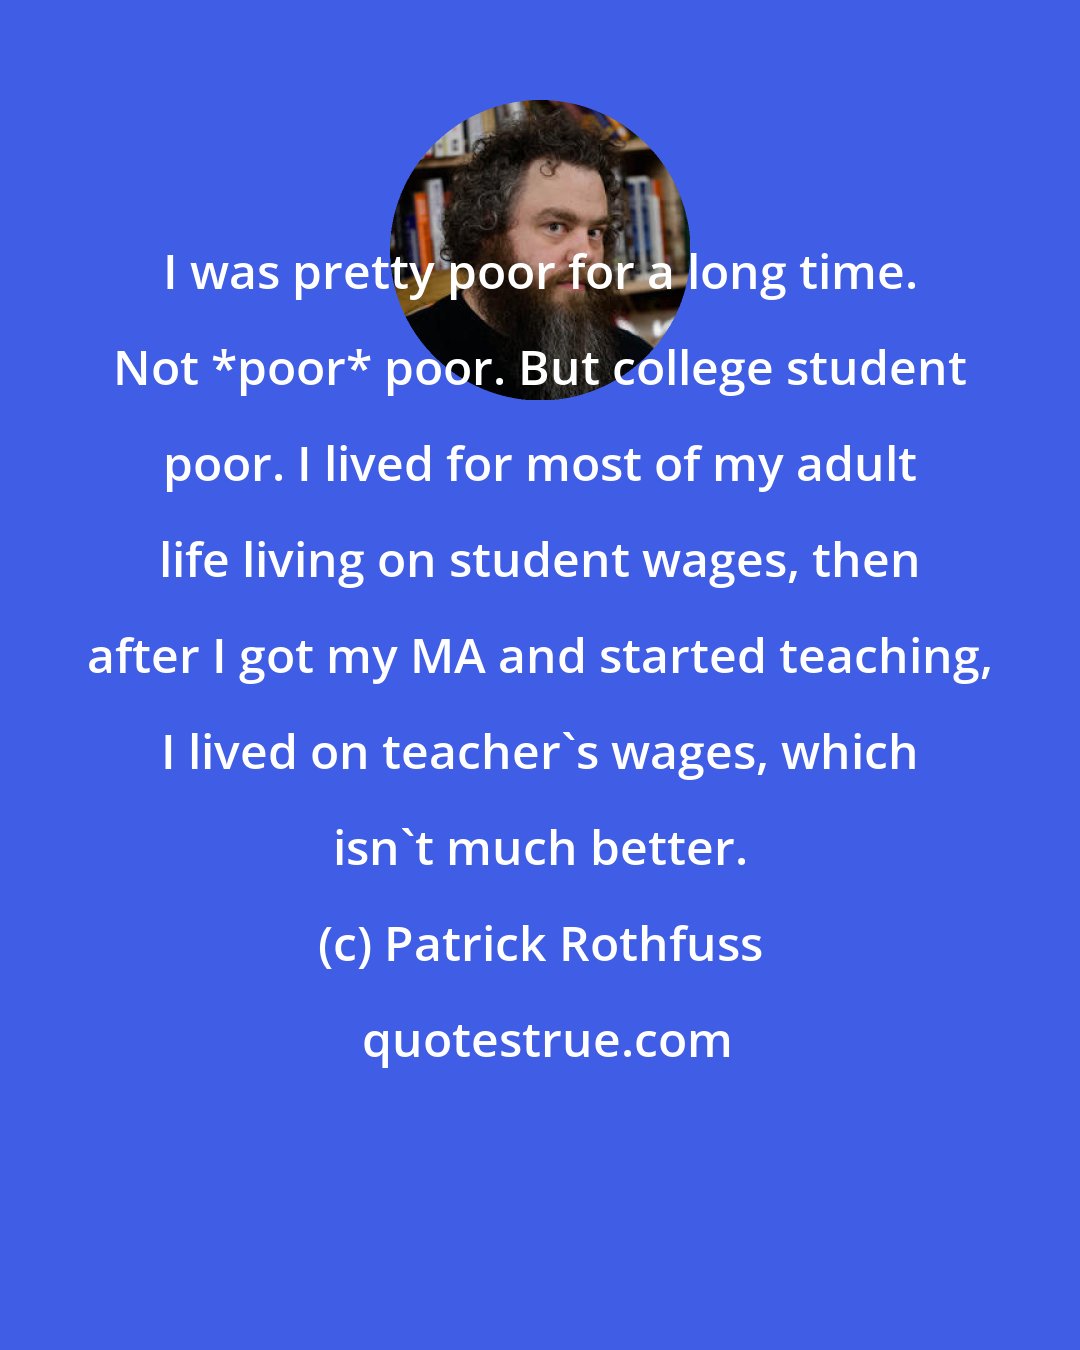 Patrick Rothfuss: I was pretty poor for a long time. Not *poor* poor. But college student poor. I lived for most of my adult life living on student wages, then after I got my MA and started teaching, I lived on teacher's wages, which isn't much better.